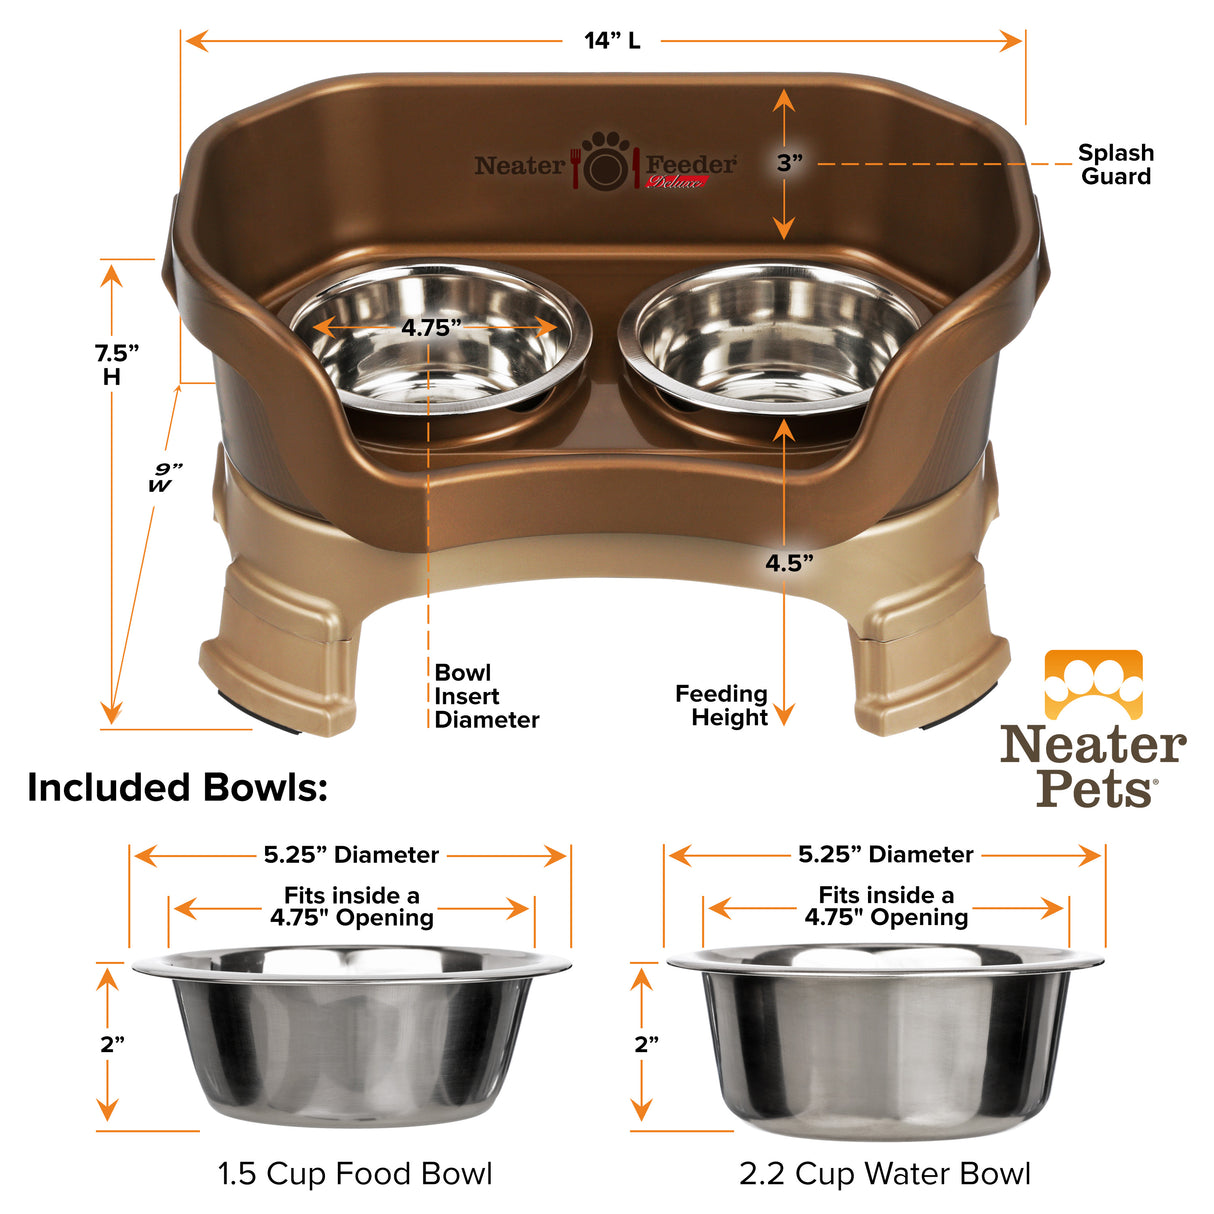 Small dog feeder and bowl dimensions